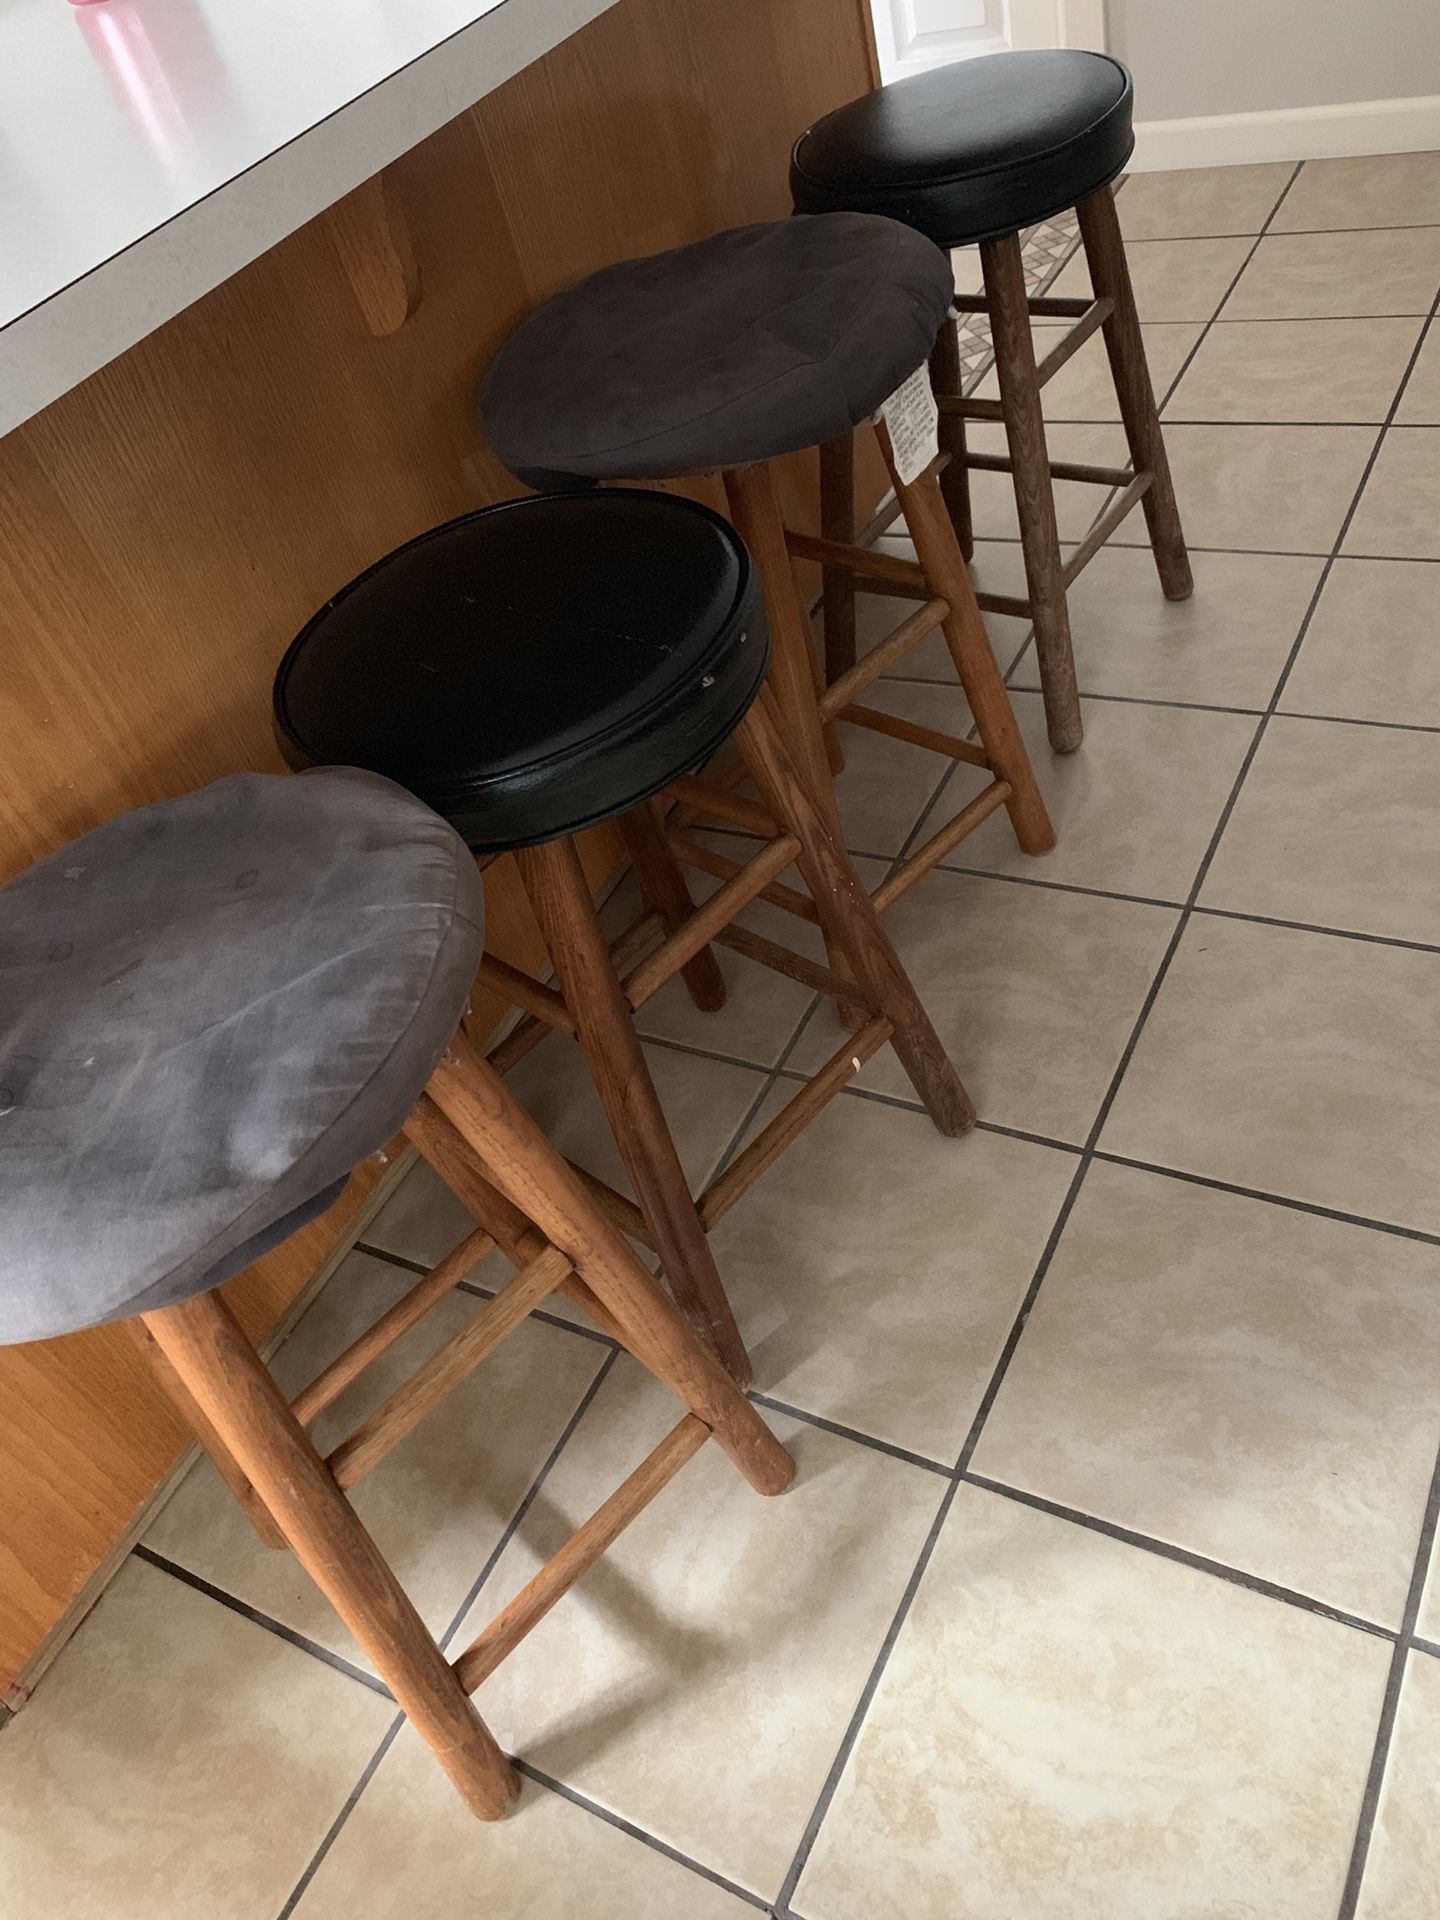 4 used stools. $10 all 4. Tiny splash paint on them. 2 are leather still good. Can use a little cleaning. I can do 20 on the table or best offer.